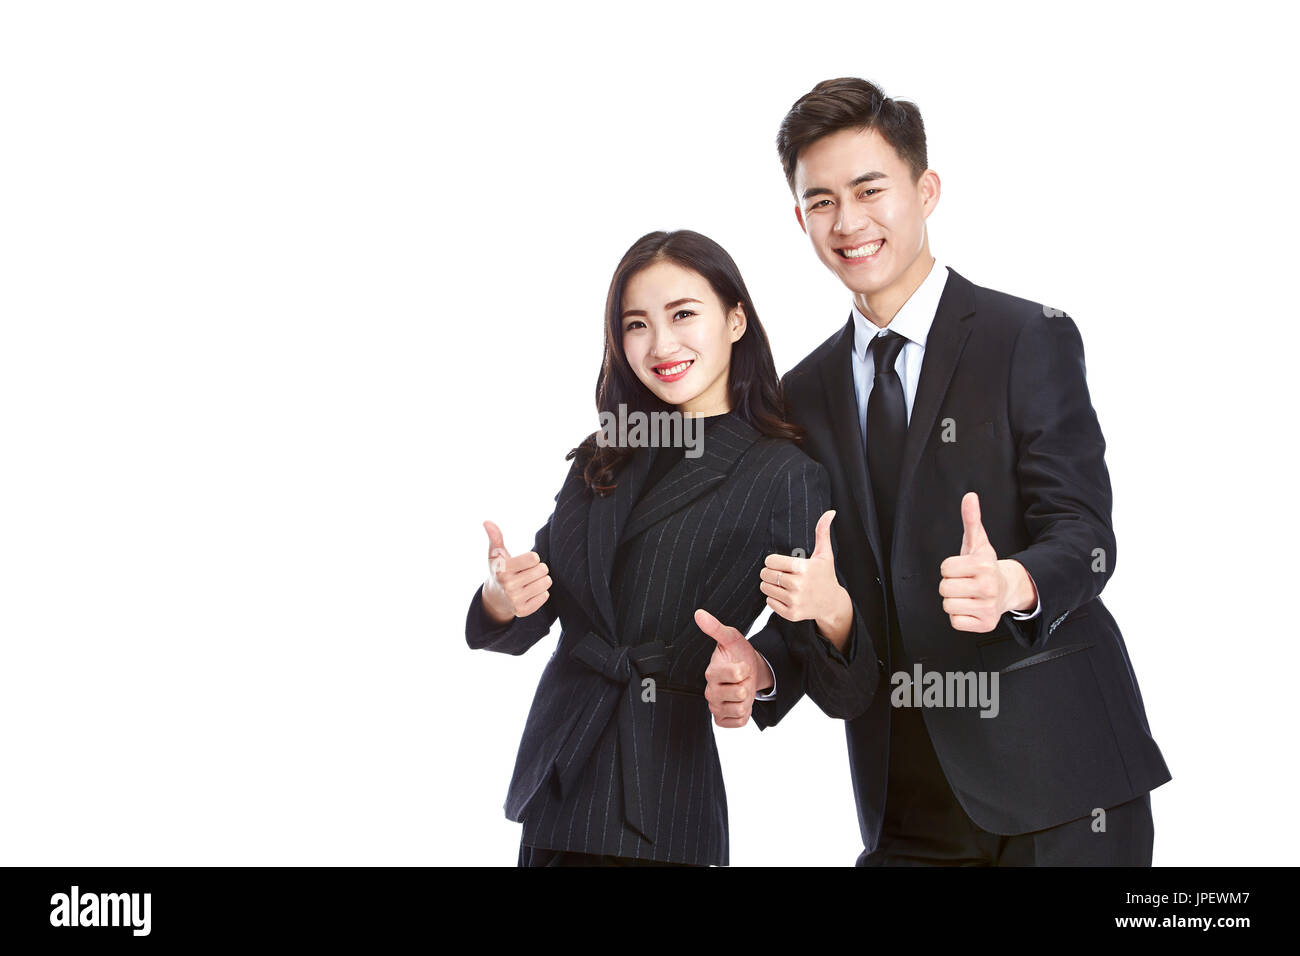 pair of asian business people in formal wear showing two-thumb-up sign, looking at camera smiling, isolated on white background. Stock Photo